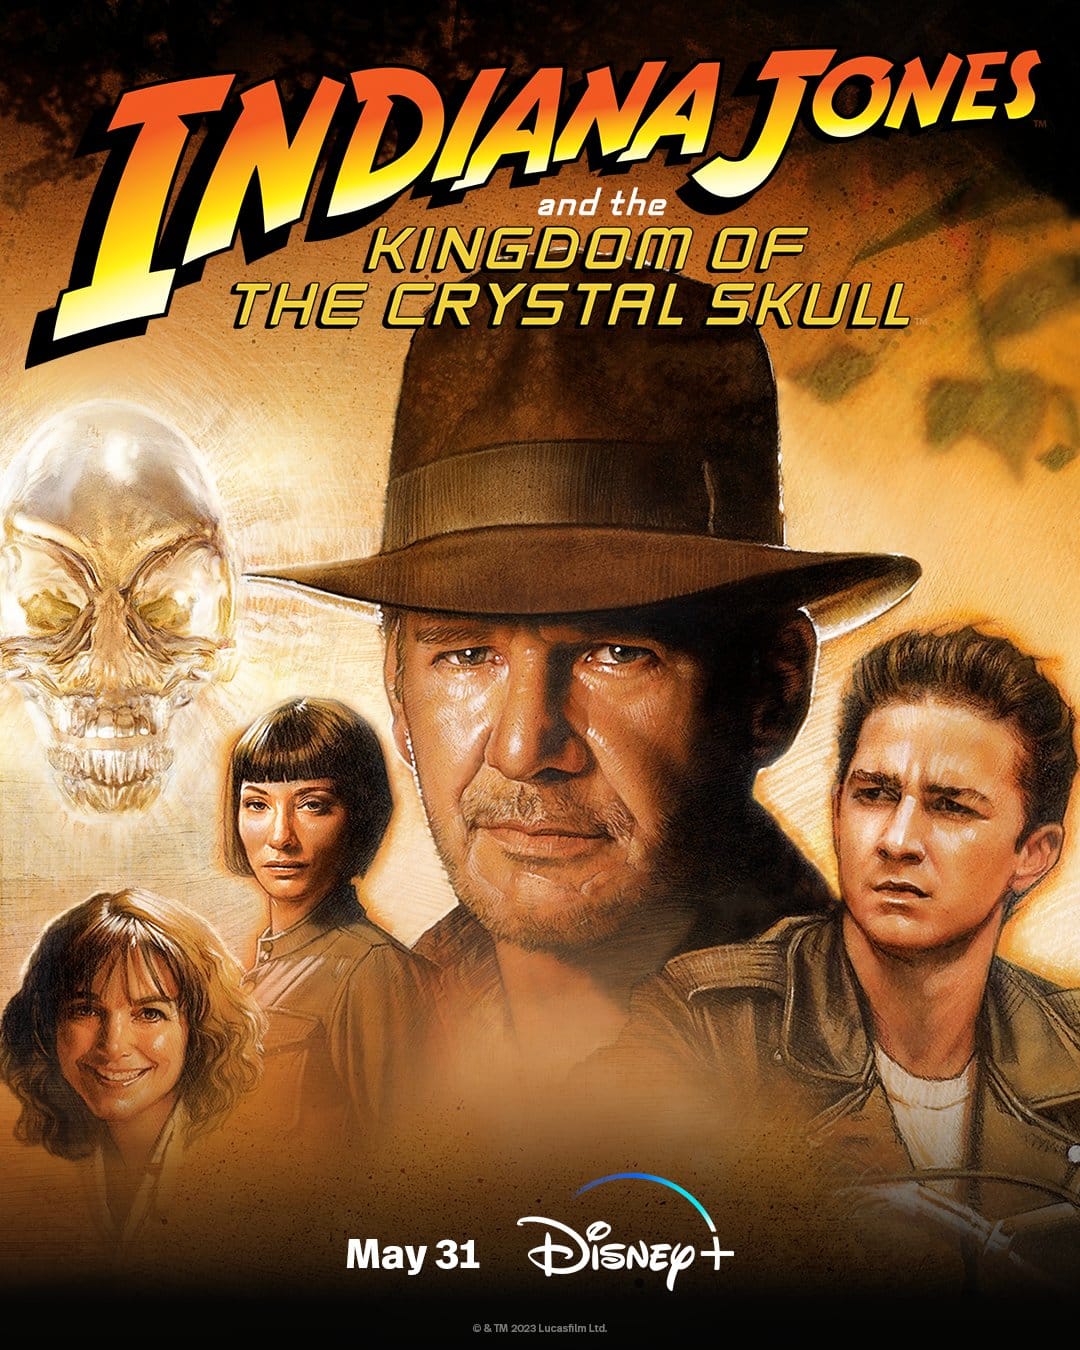 The Complete Indiana Jones Franchise Is Coming to Disney+